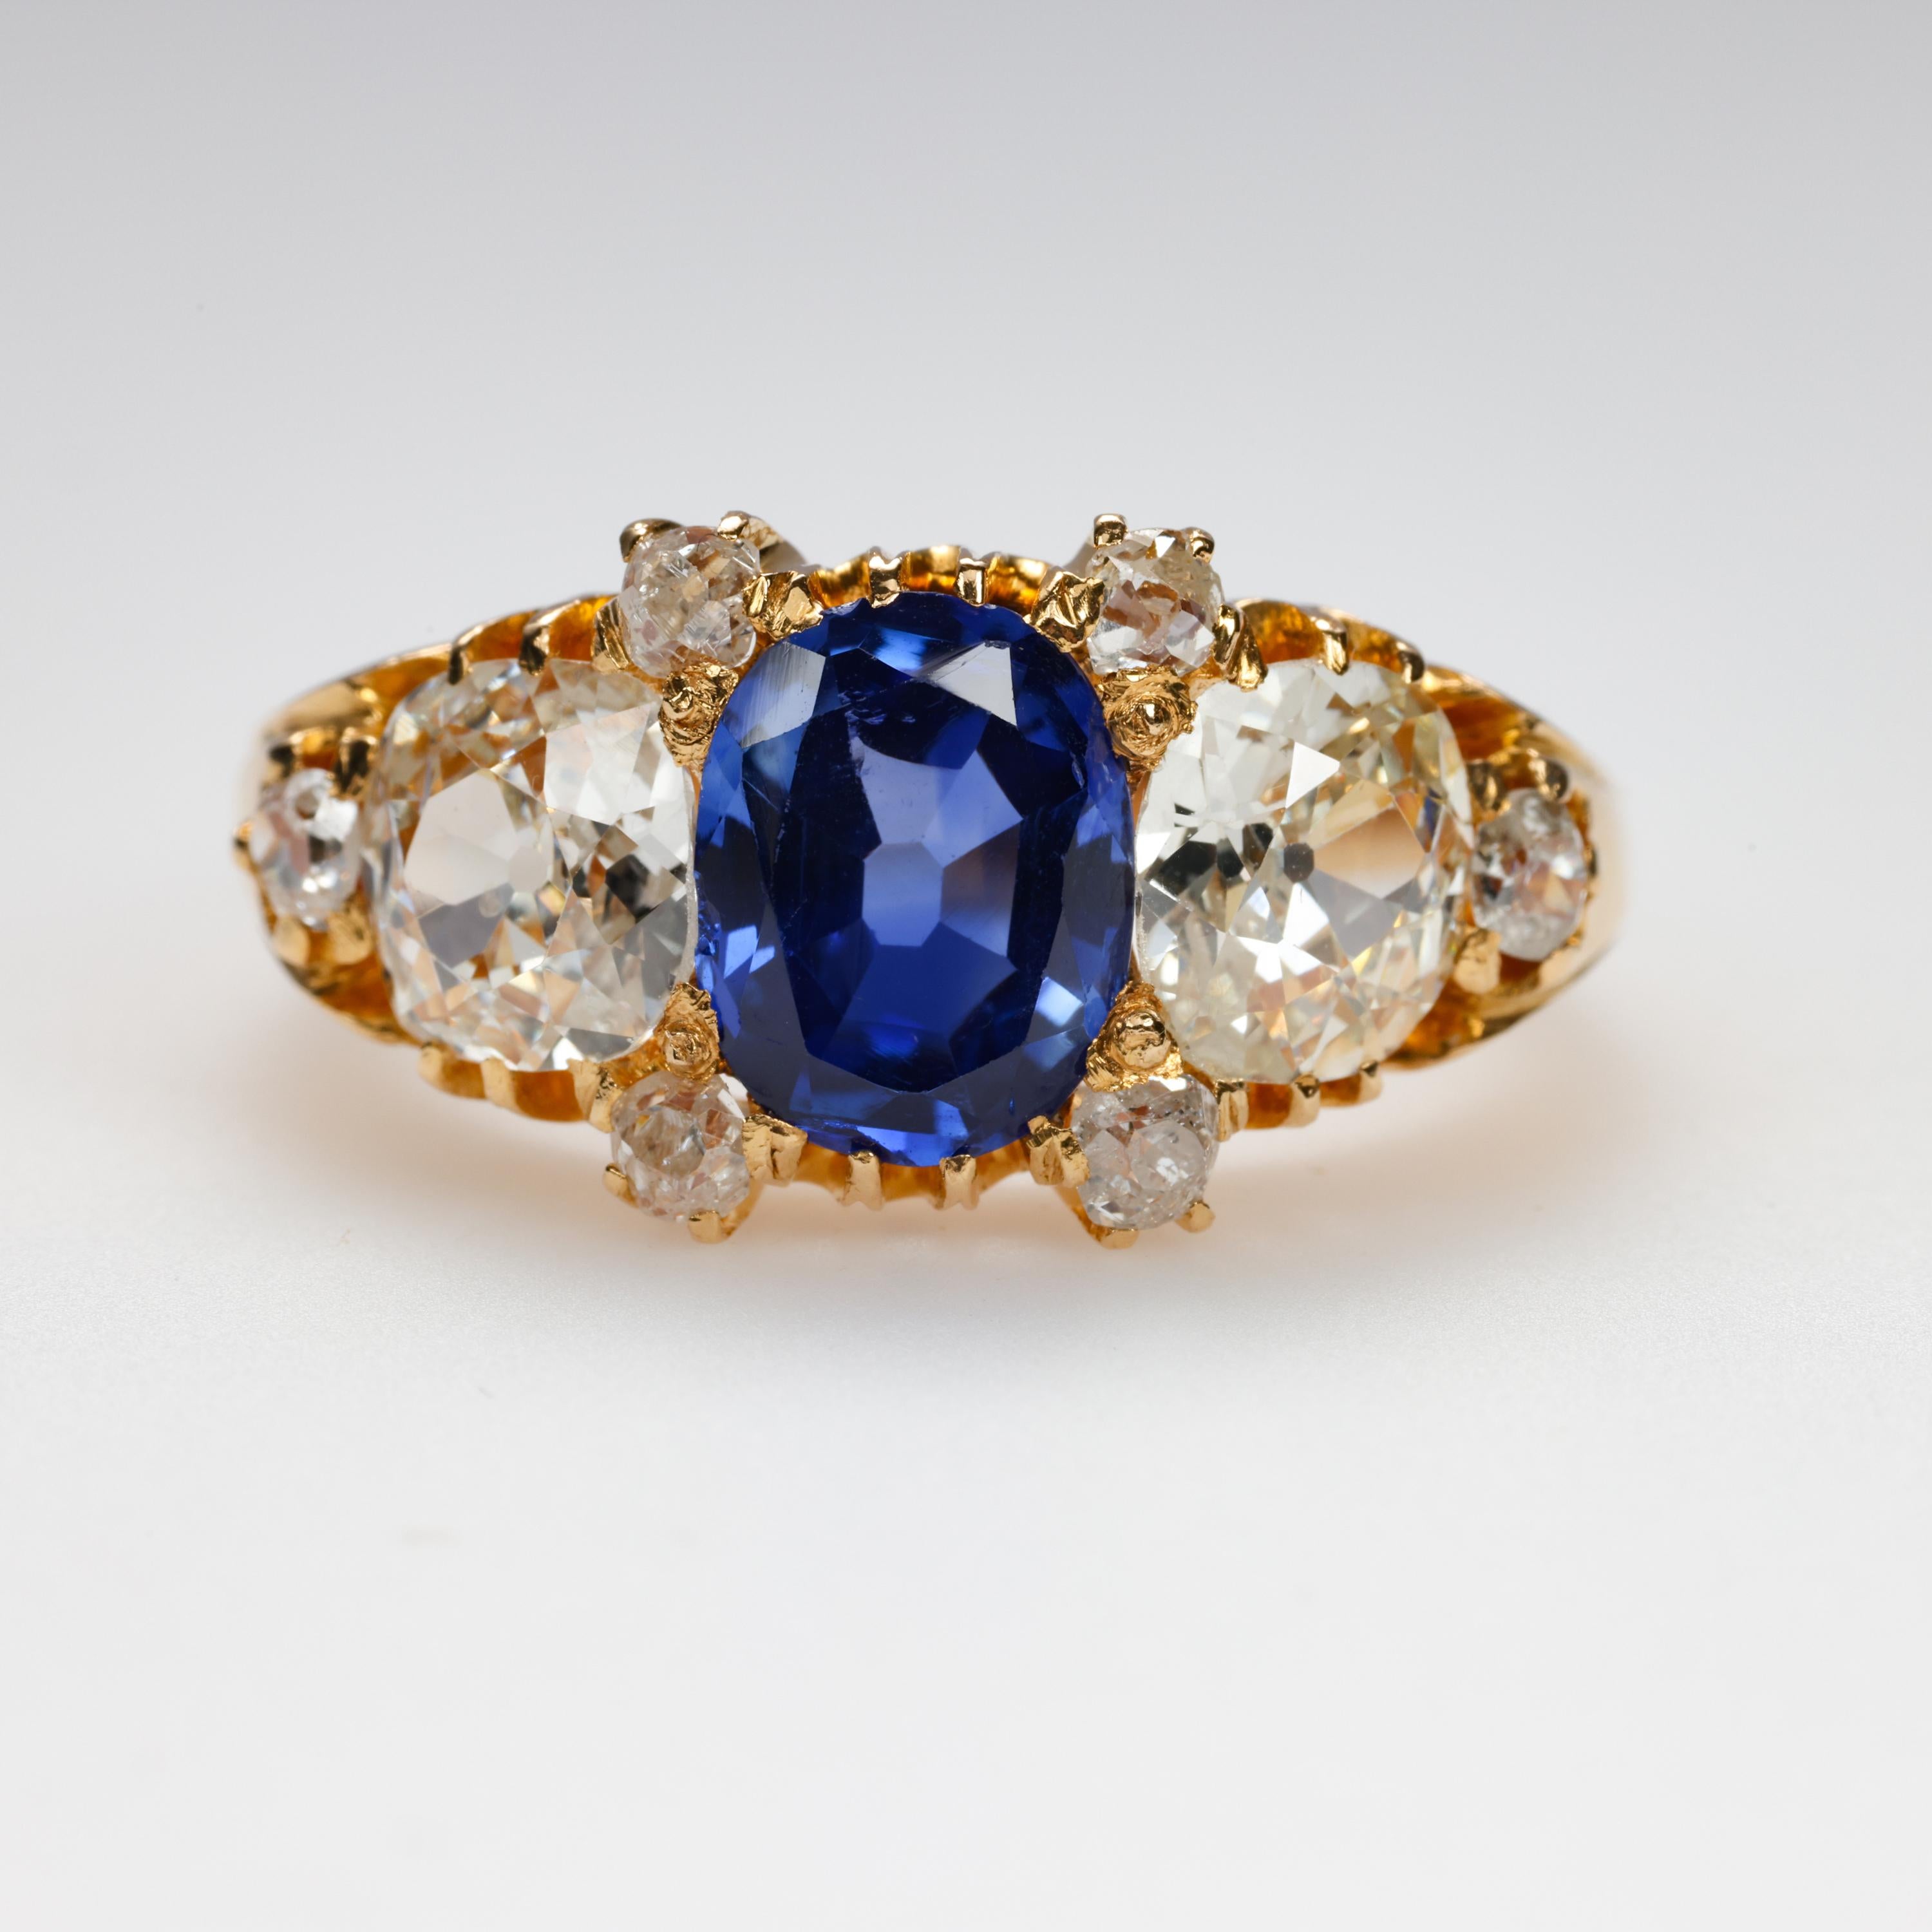 An antique Kashmir sapphire that is open and bright, vivid and intense is the centerpiece of this exceedingly rare unisex ring from the mid-1880s to early 1900s. Hand-crafted in high-karat gold (either 23K or 24K), the ring showcases an oval